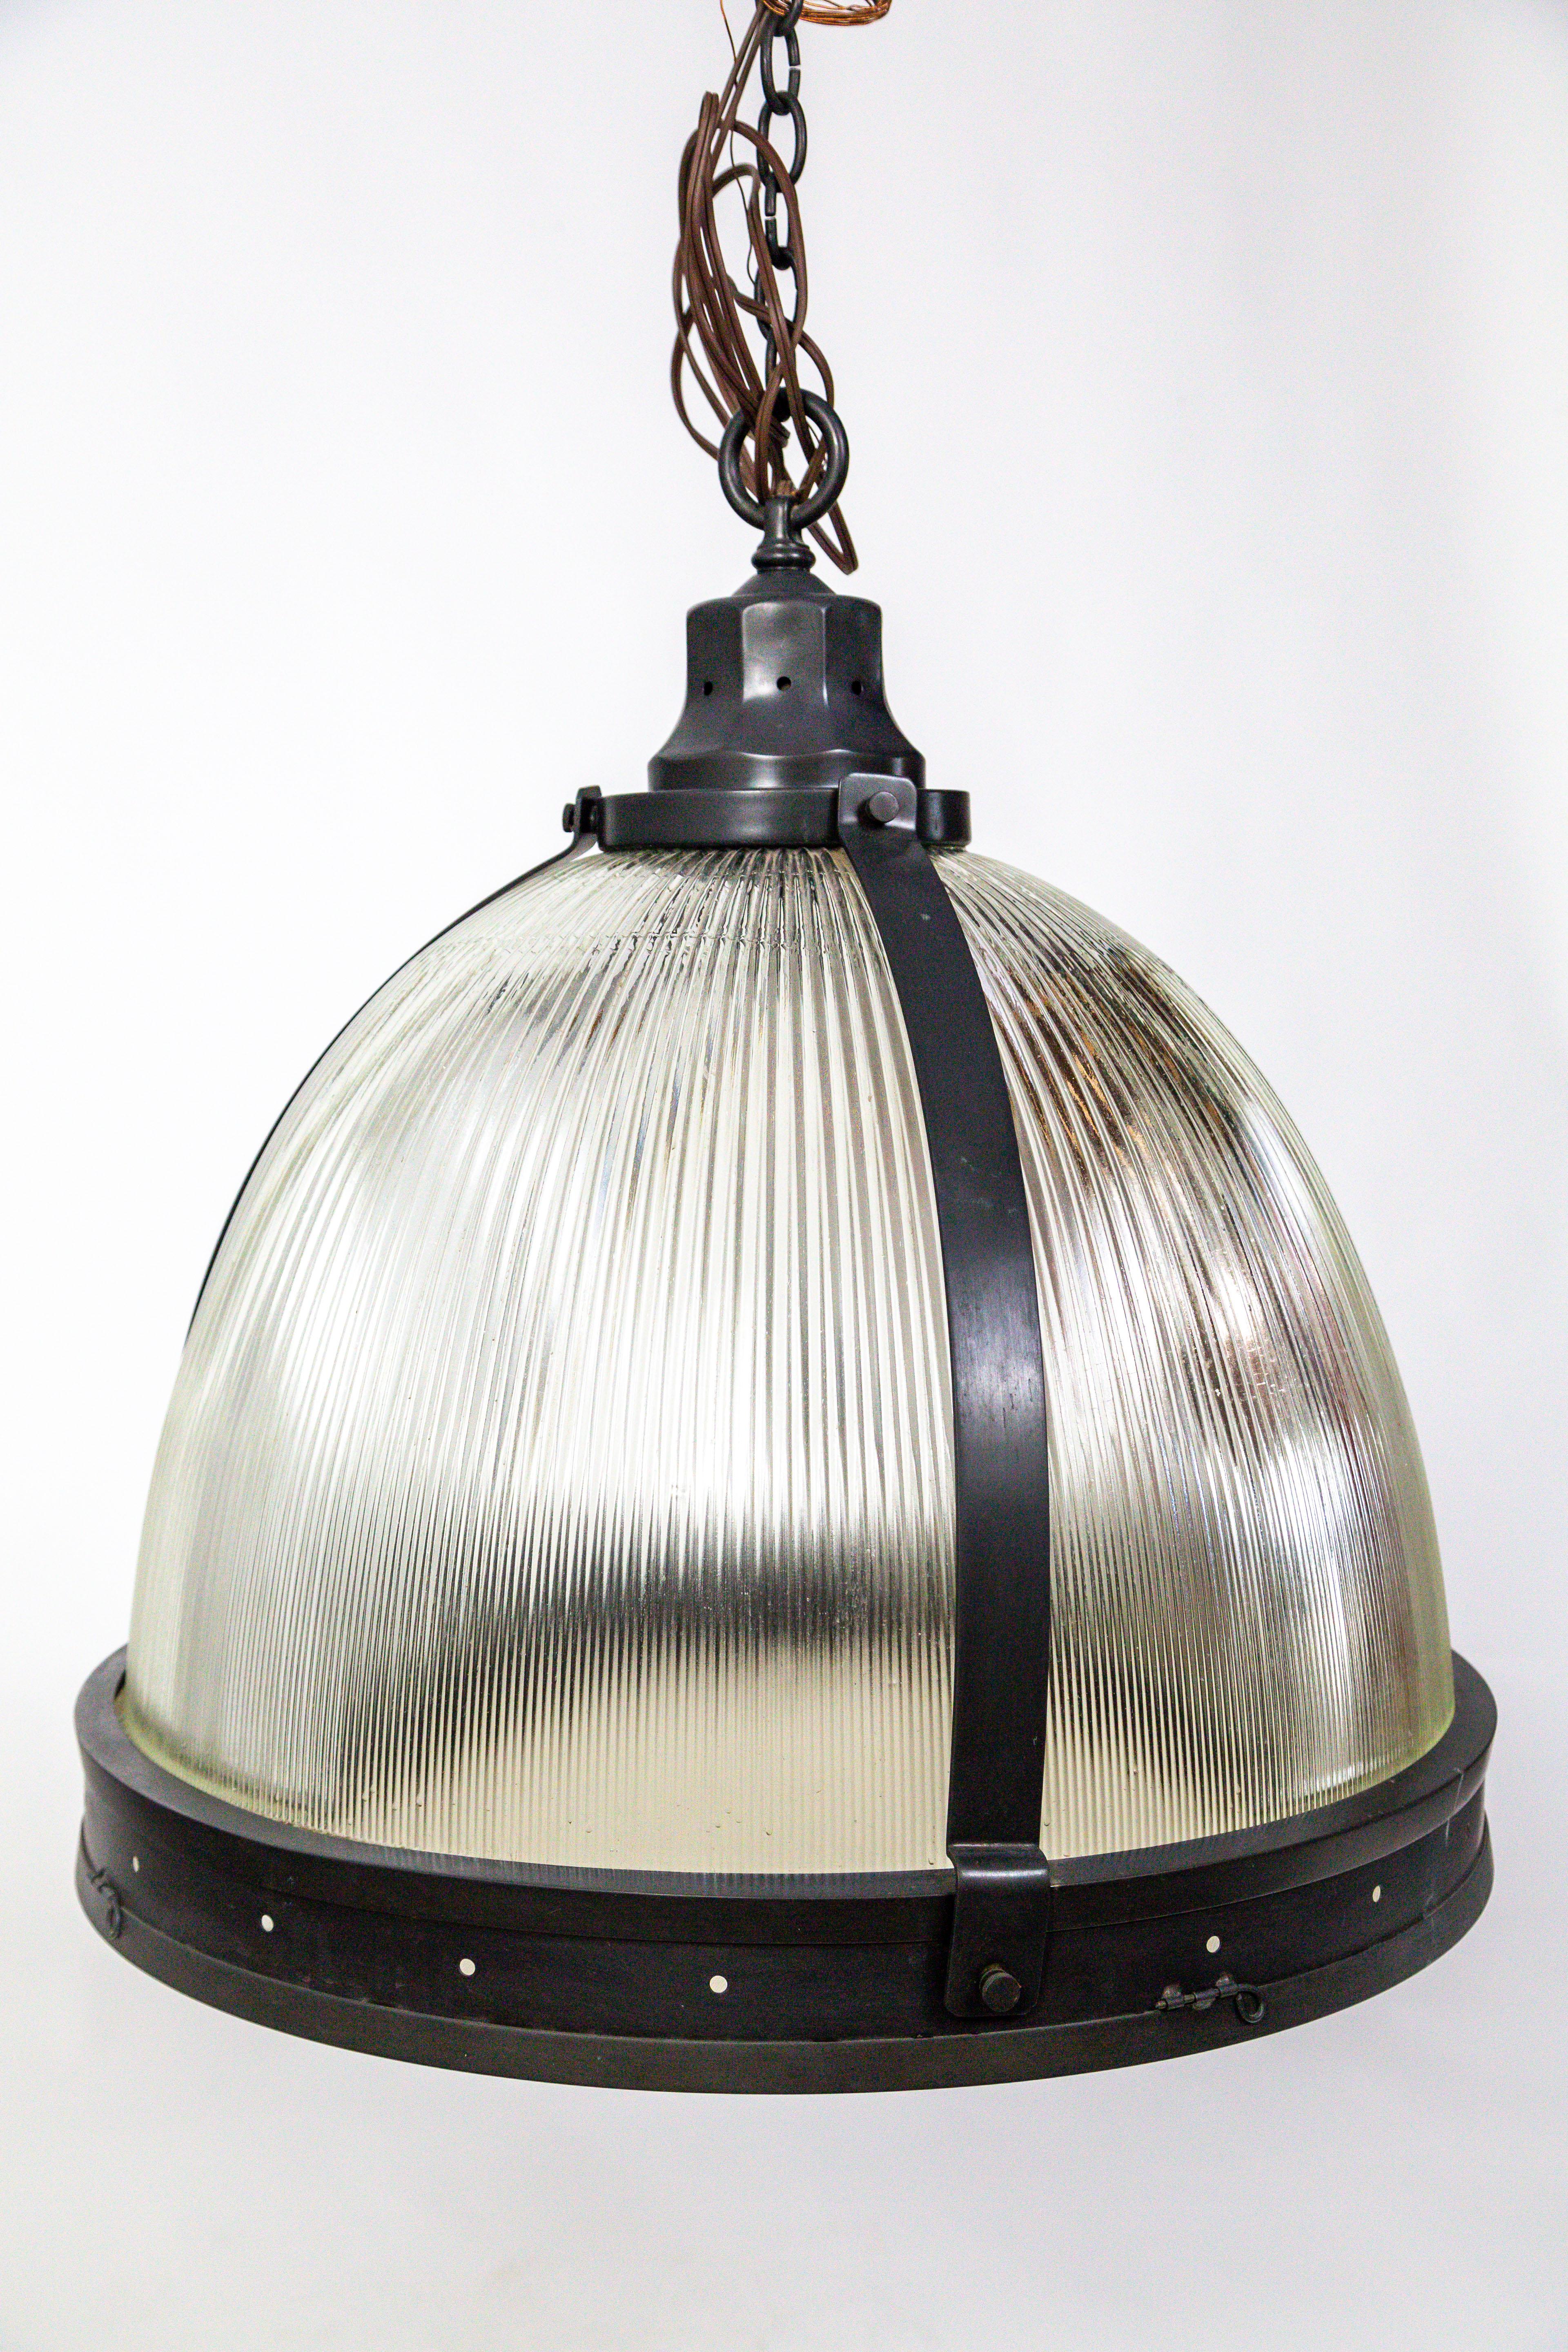 Oversized single Holophane glass pendant with attached glass diffuser. Hand rubbed bronze finish on all brass fittings.